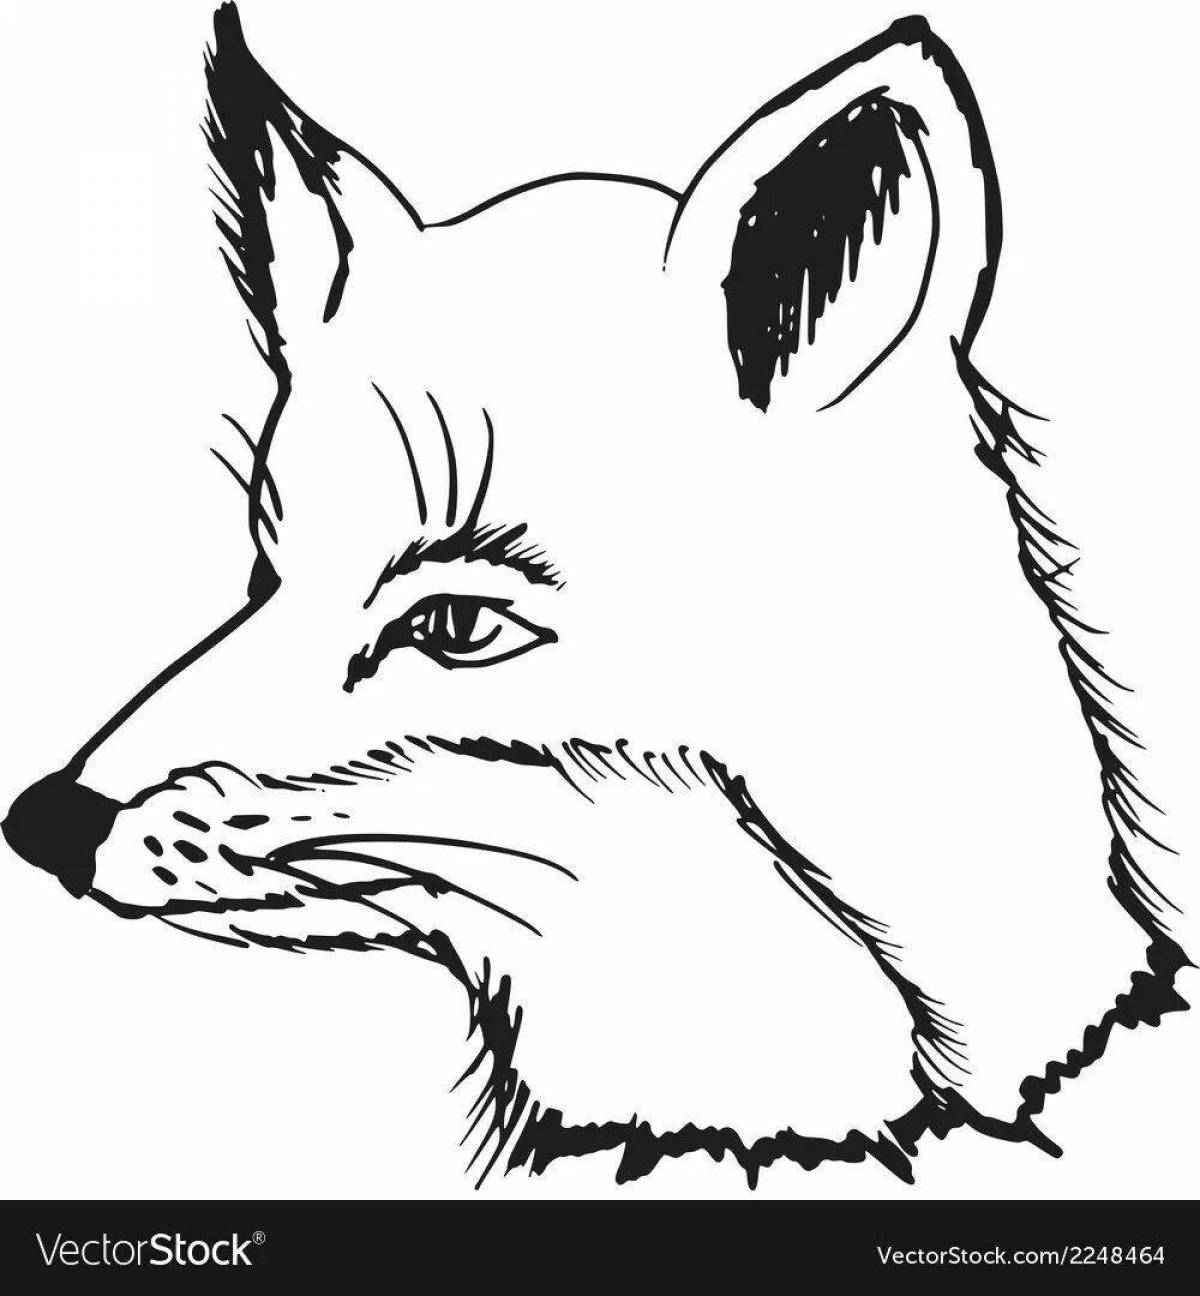 Glowing fox coloring page